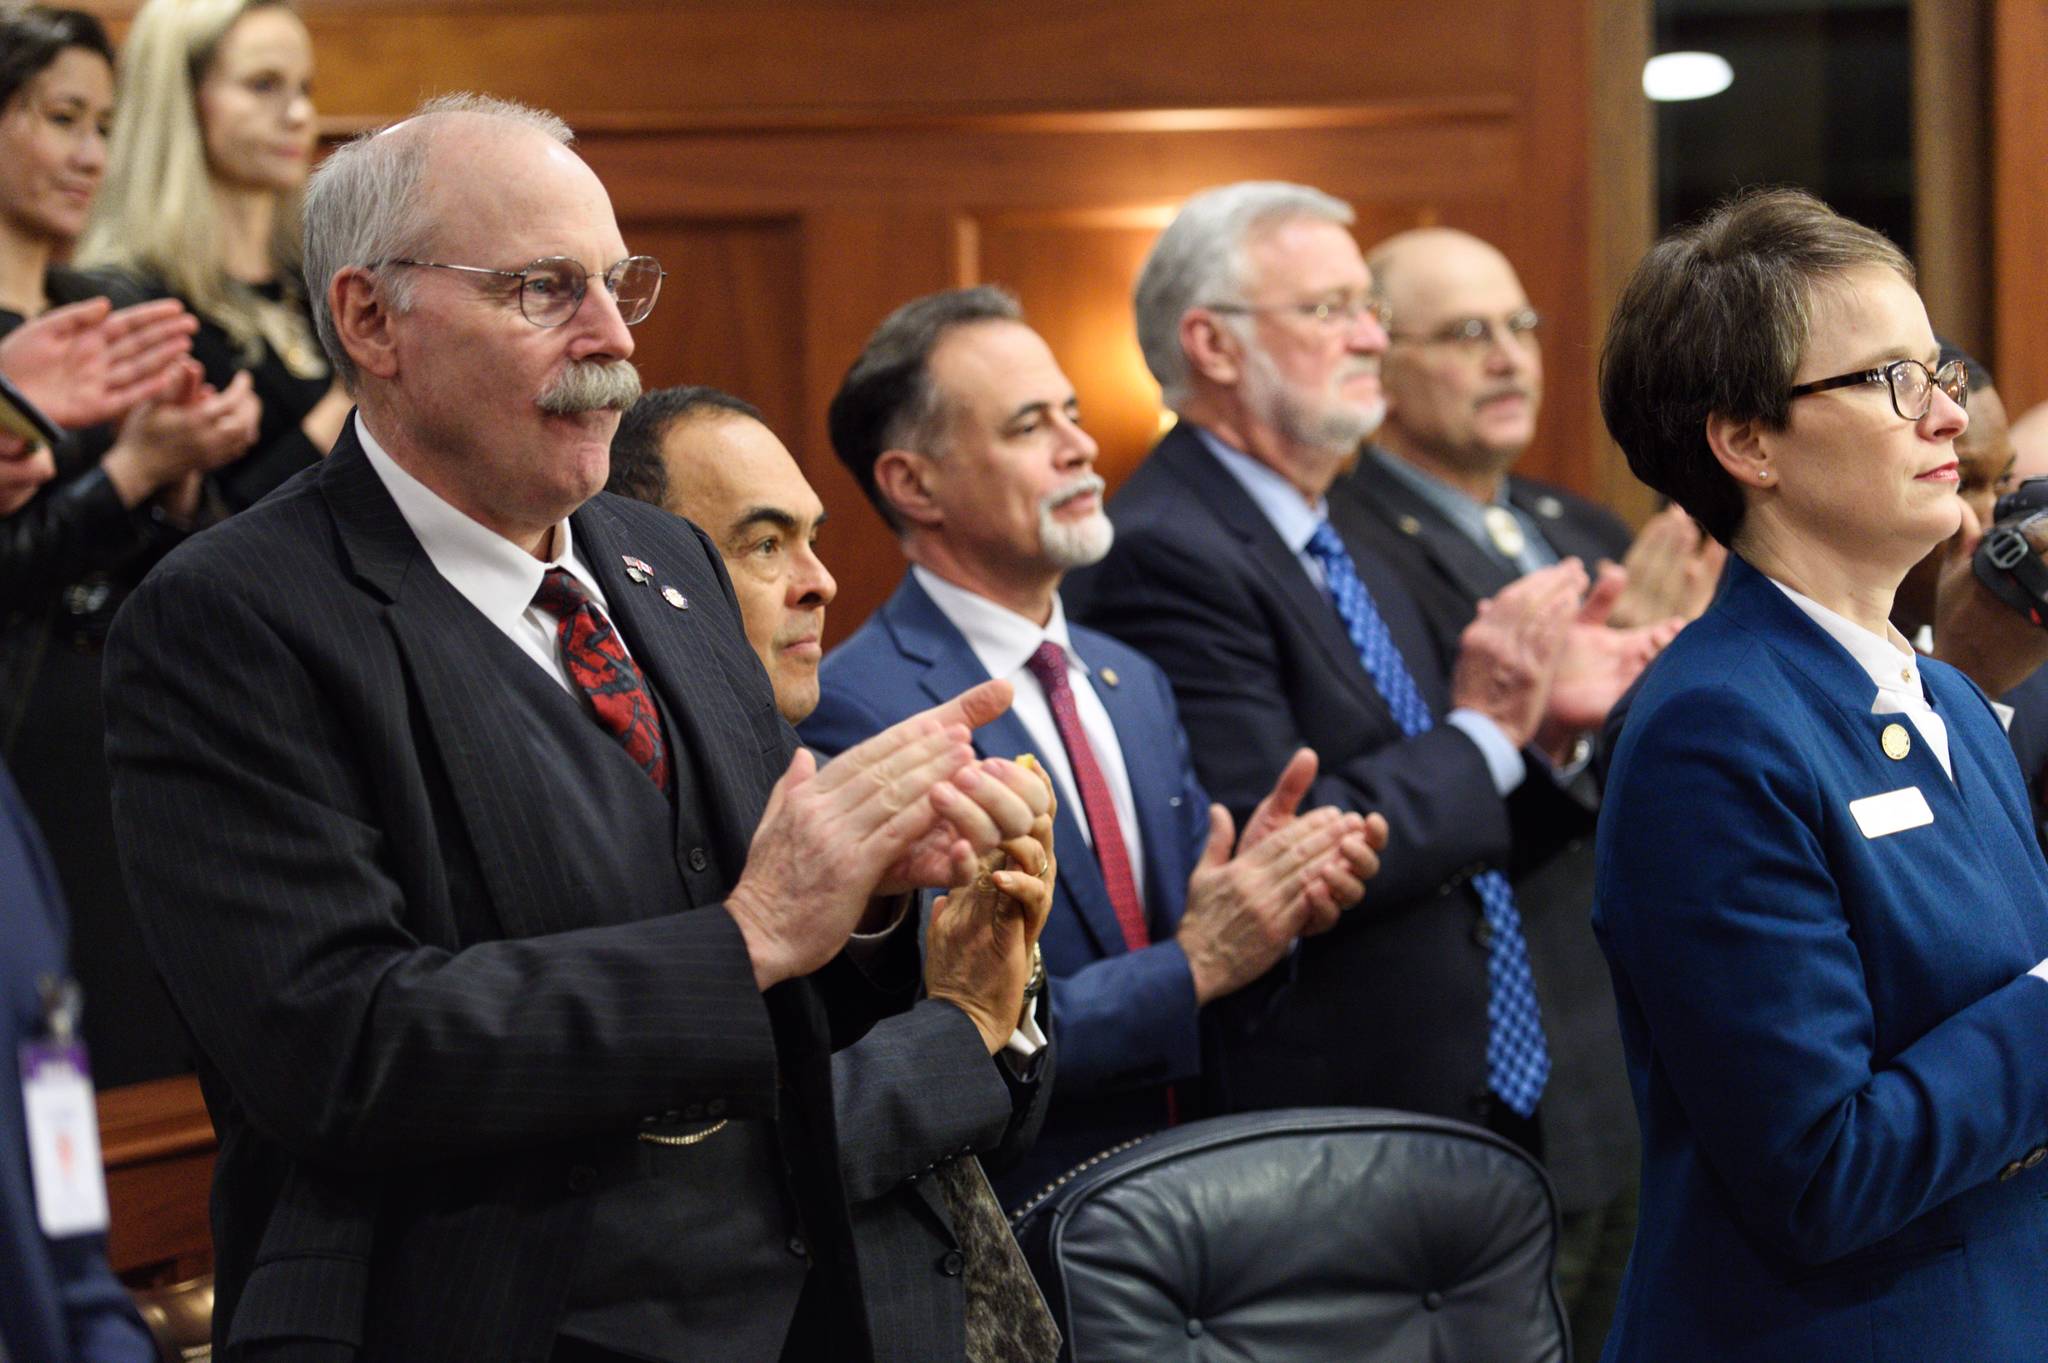 Lawmakers applaud Gov. Mike Dunleavy during the State of the State address at the Alaska Capitol, Jan. 22, 2019. (Michael Penn | Juneau Empire)